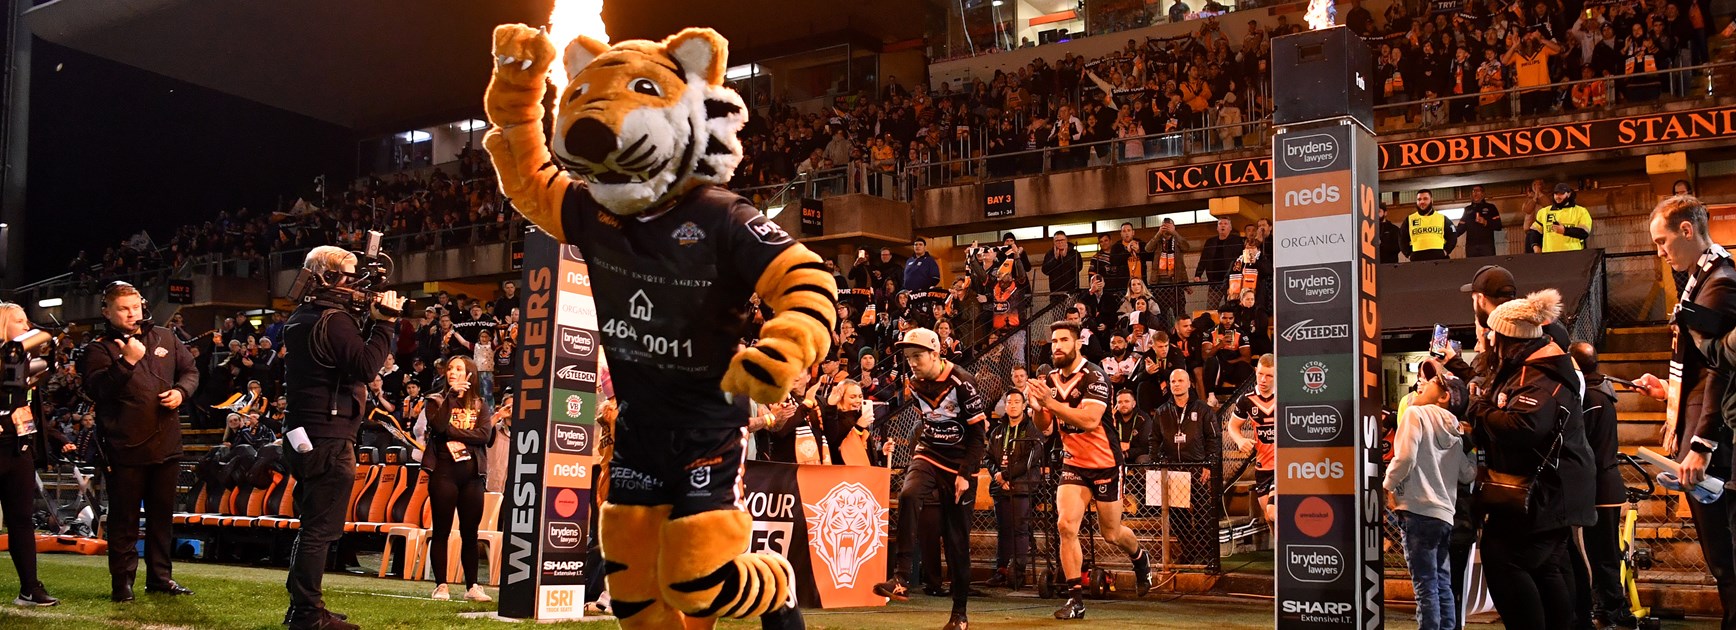 Wests Tigers name squad for first trial match